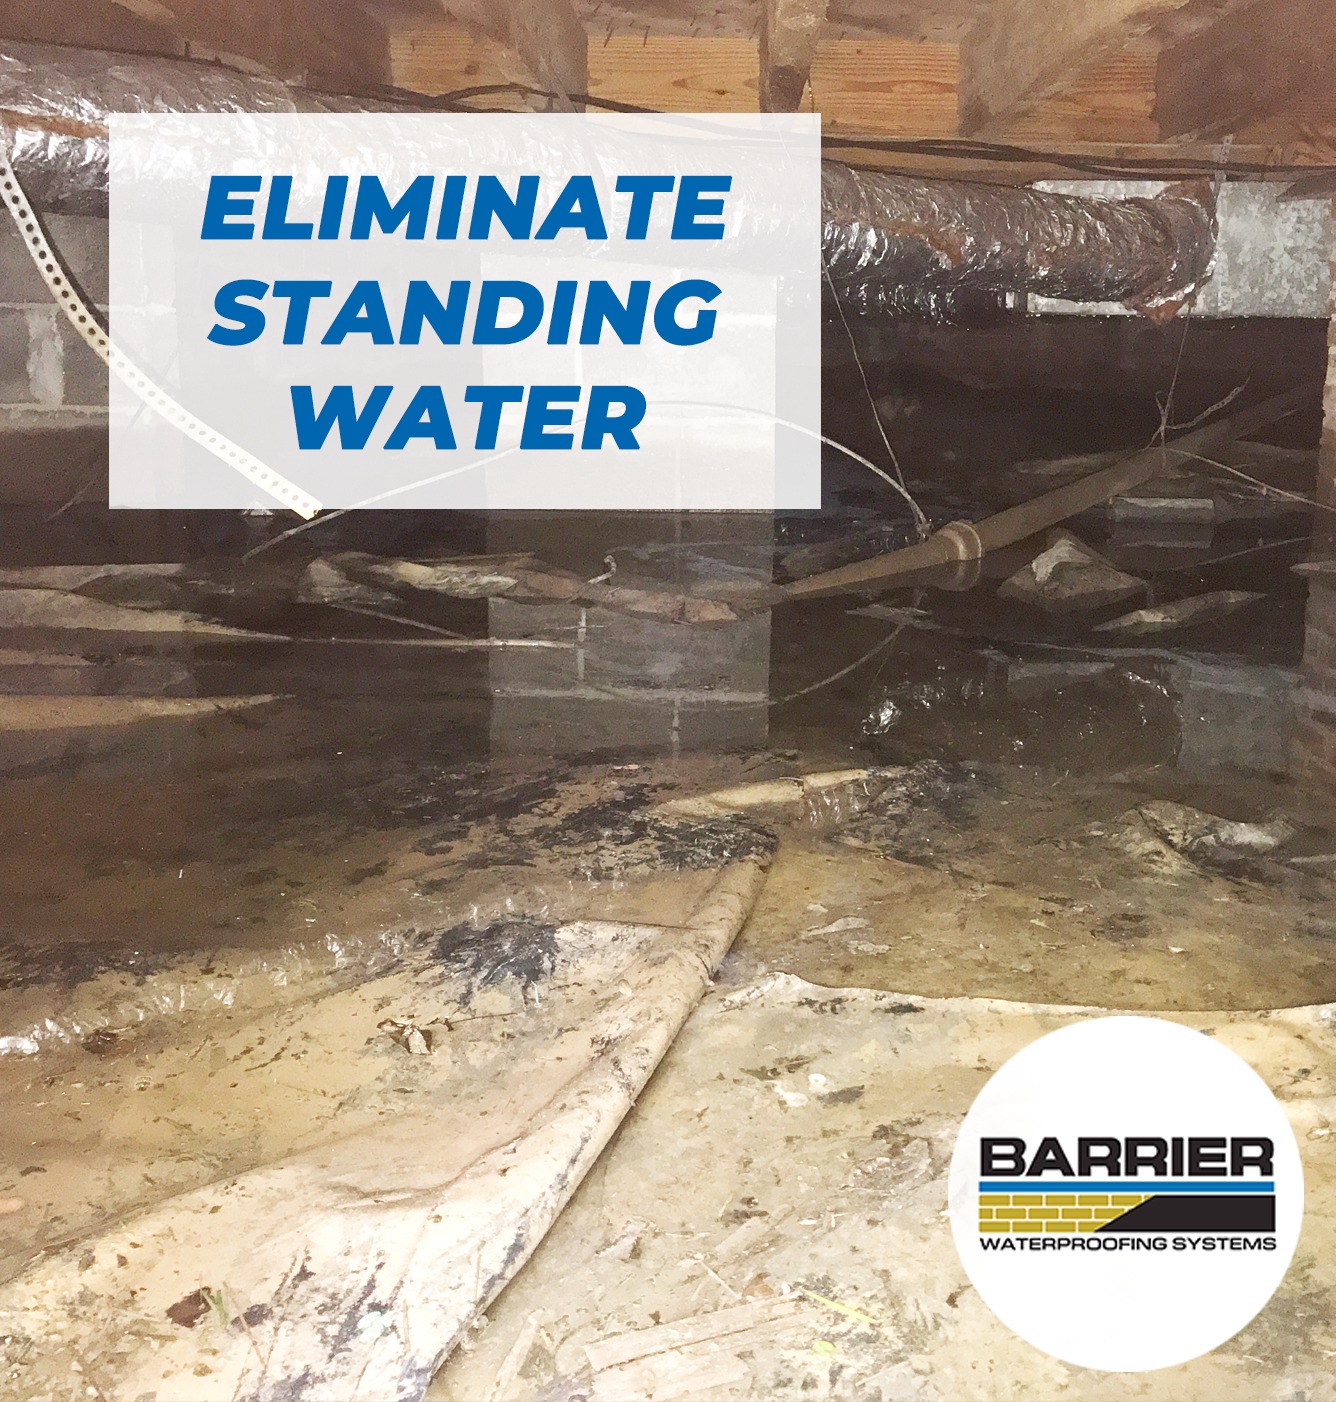 Crawl space filled with water need to eliminate standing water to prevent damage